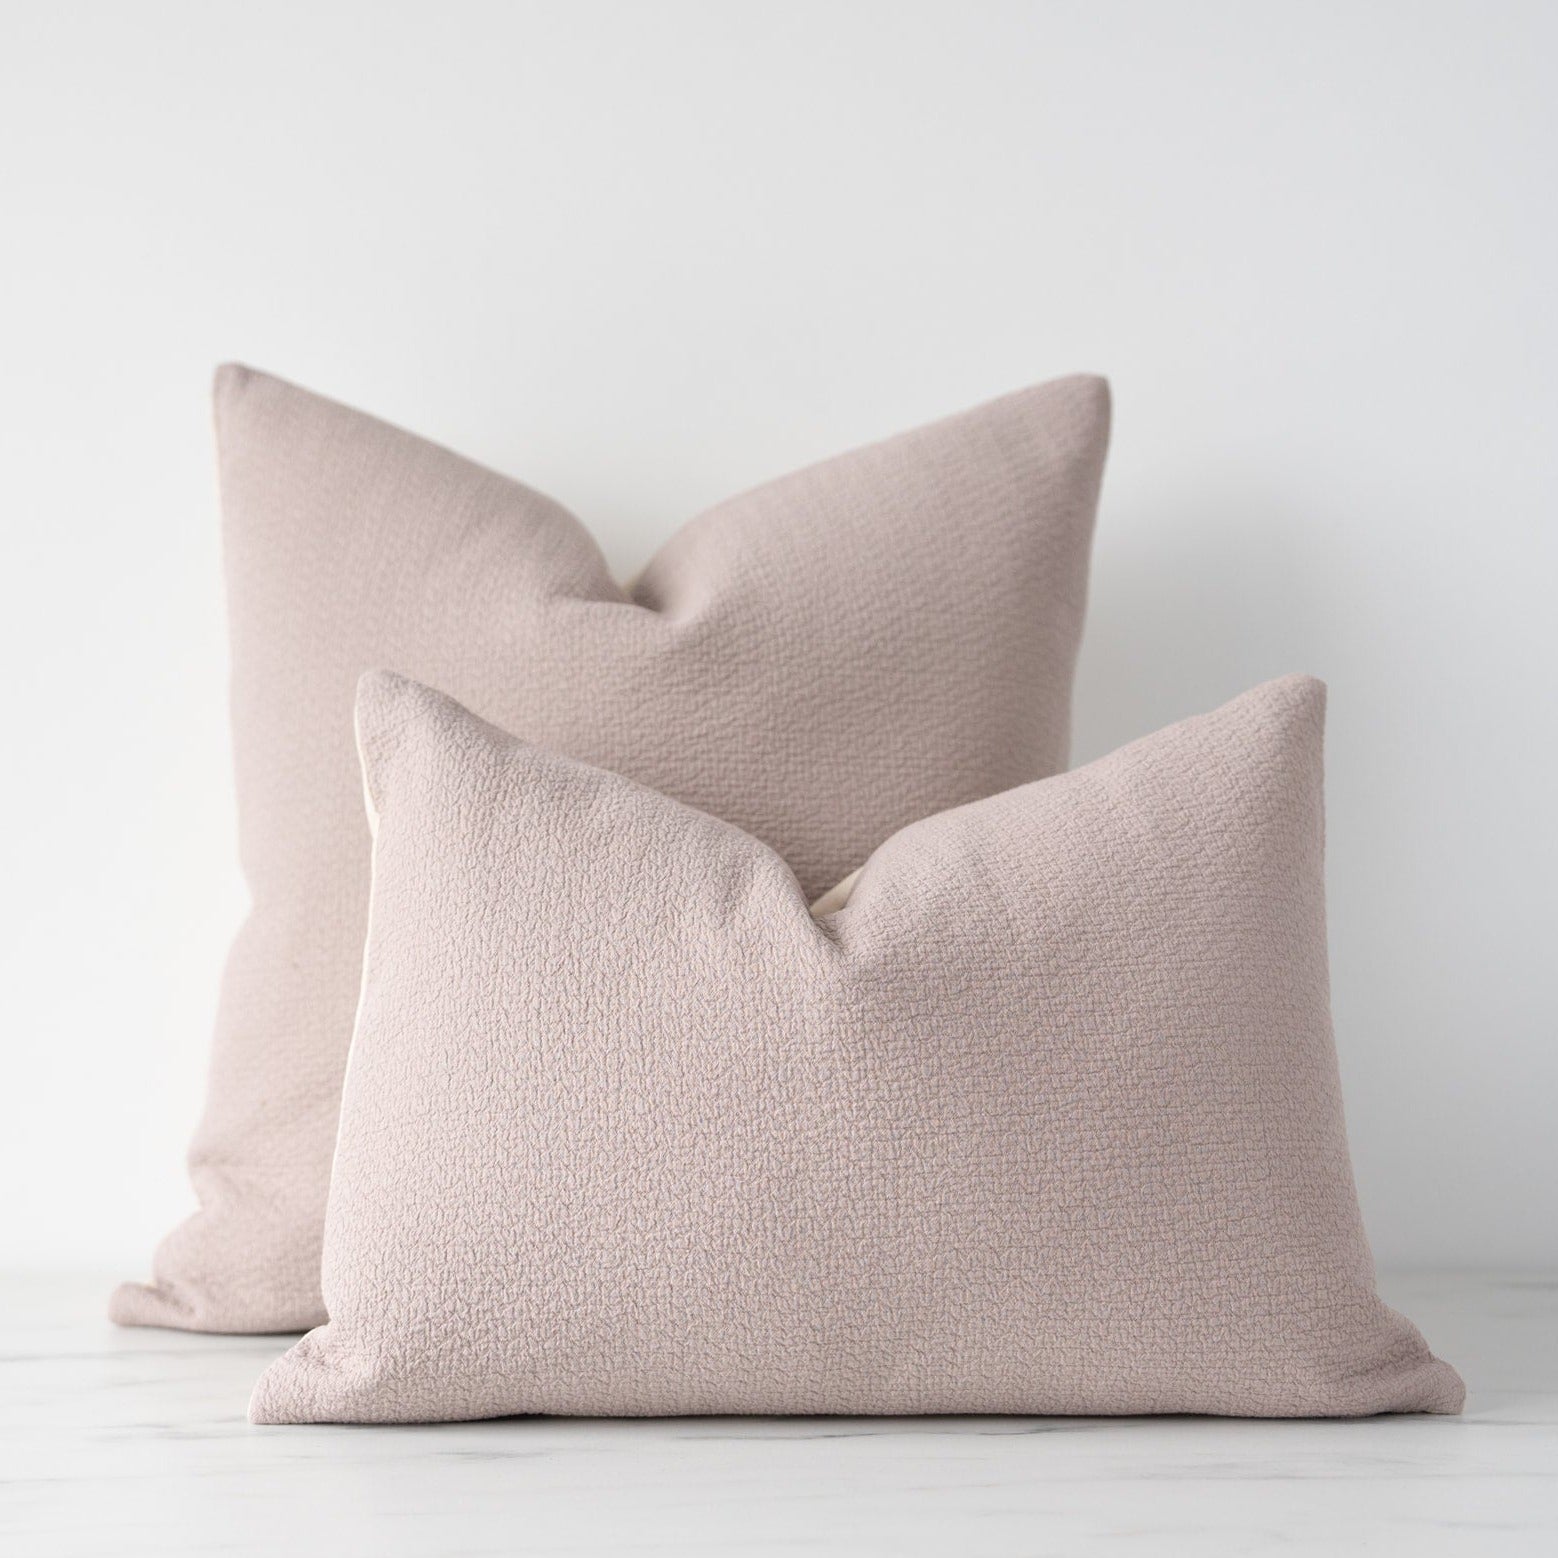 Neutral beige woven pillow covers